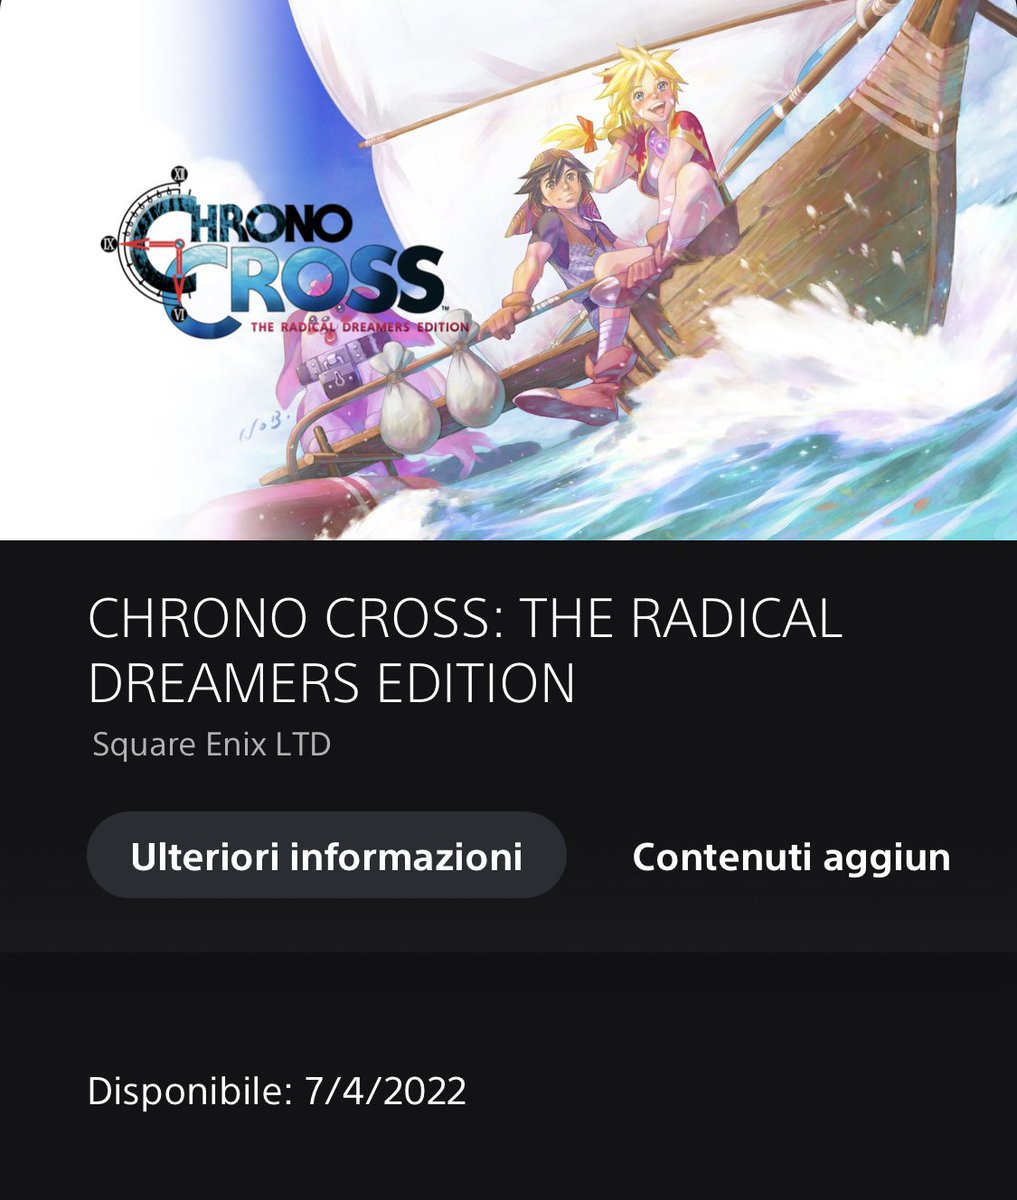 Would be nice knowing when exactly they’re going to drop  #ChronoCross preorders on PlayStation Store @chronogame https://t.co/mb0xqB2RR1